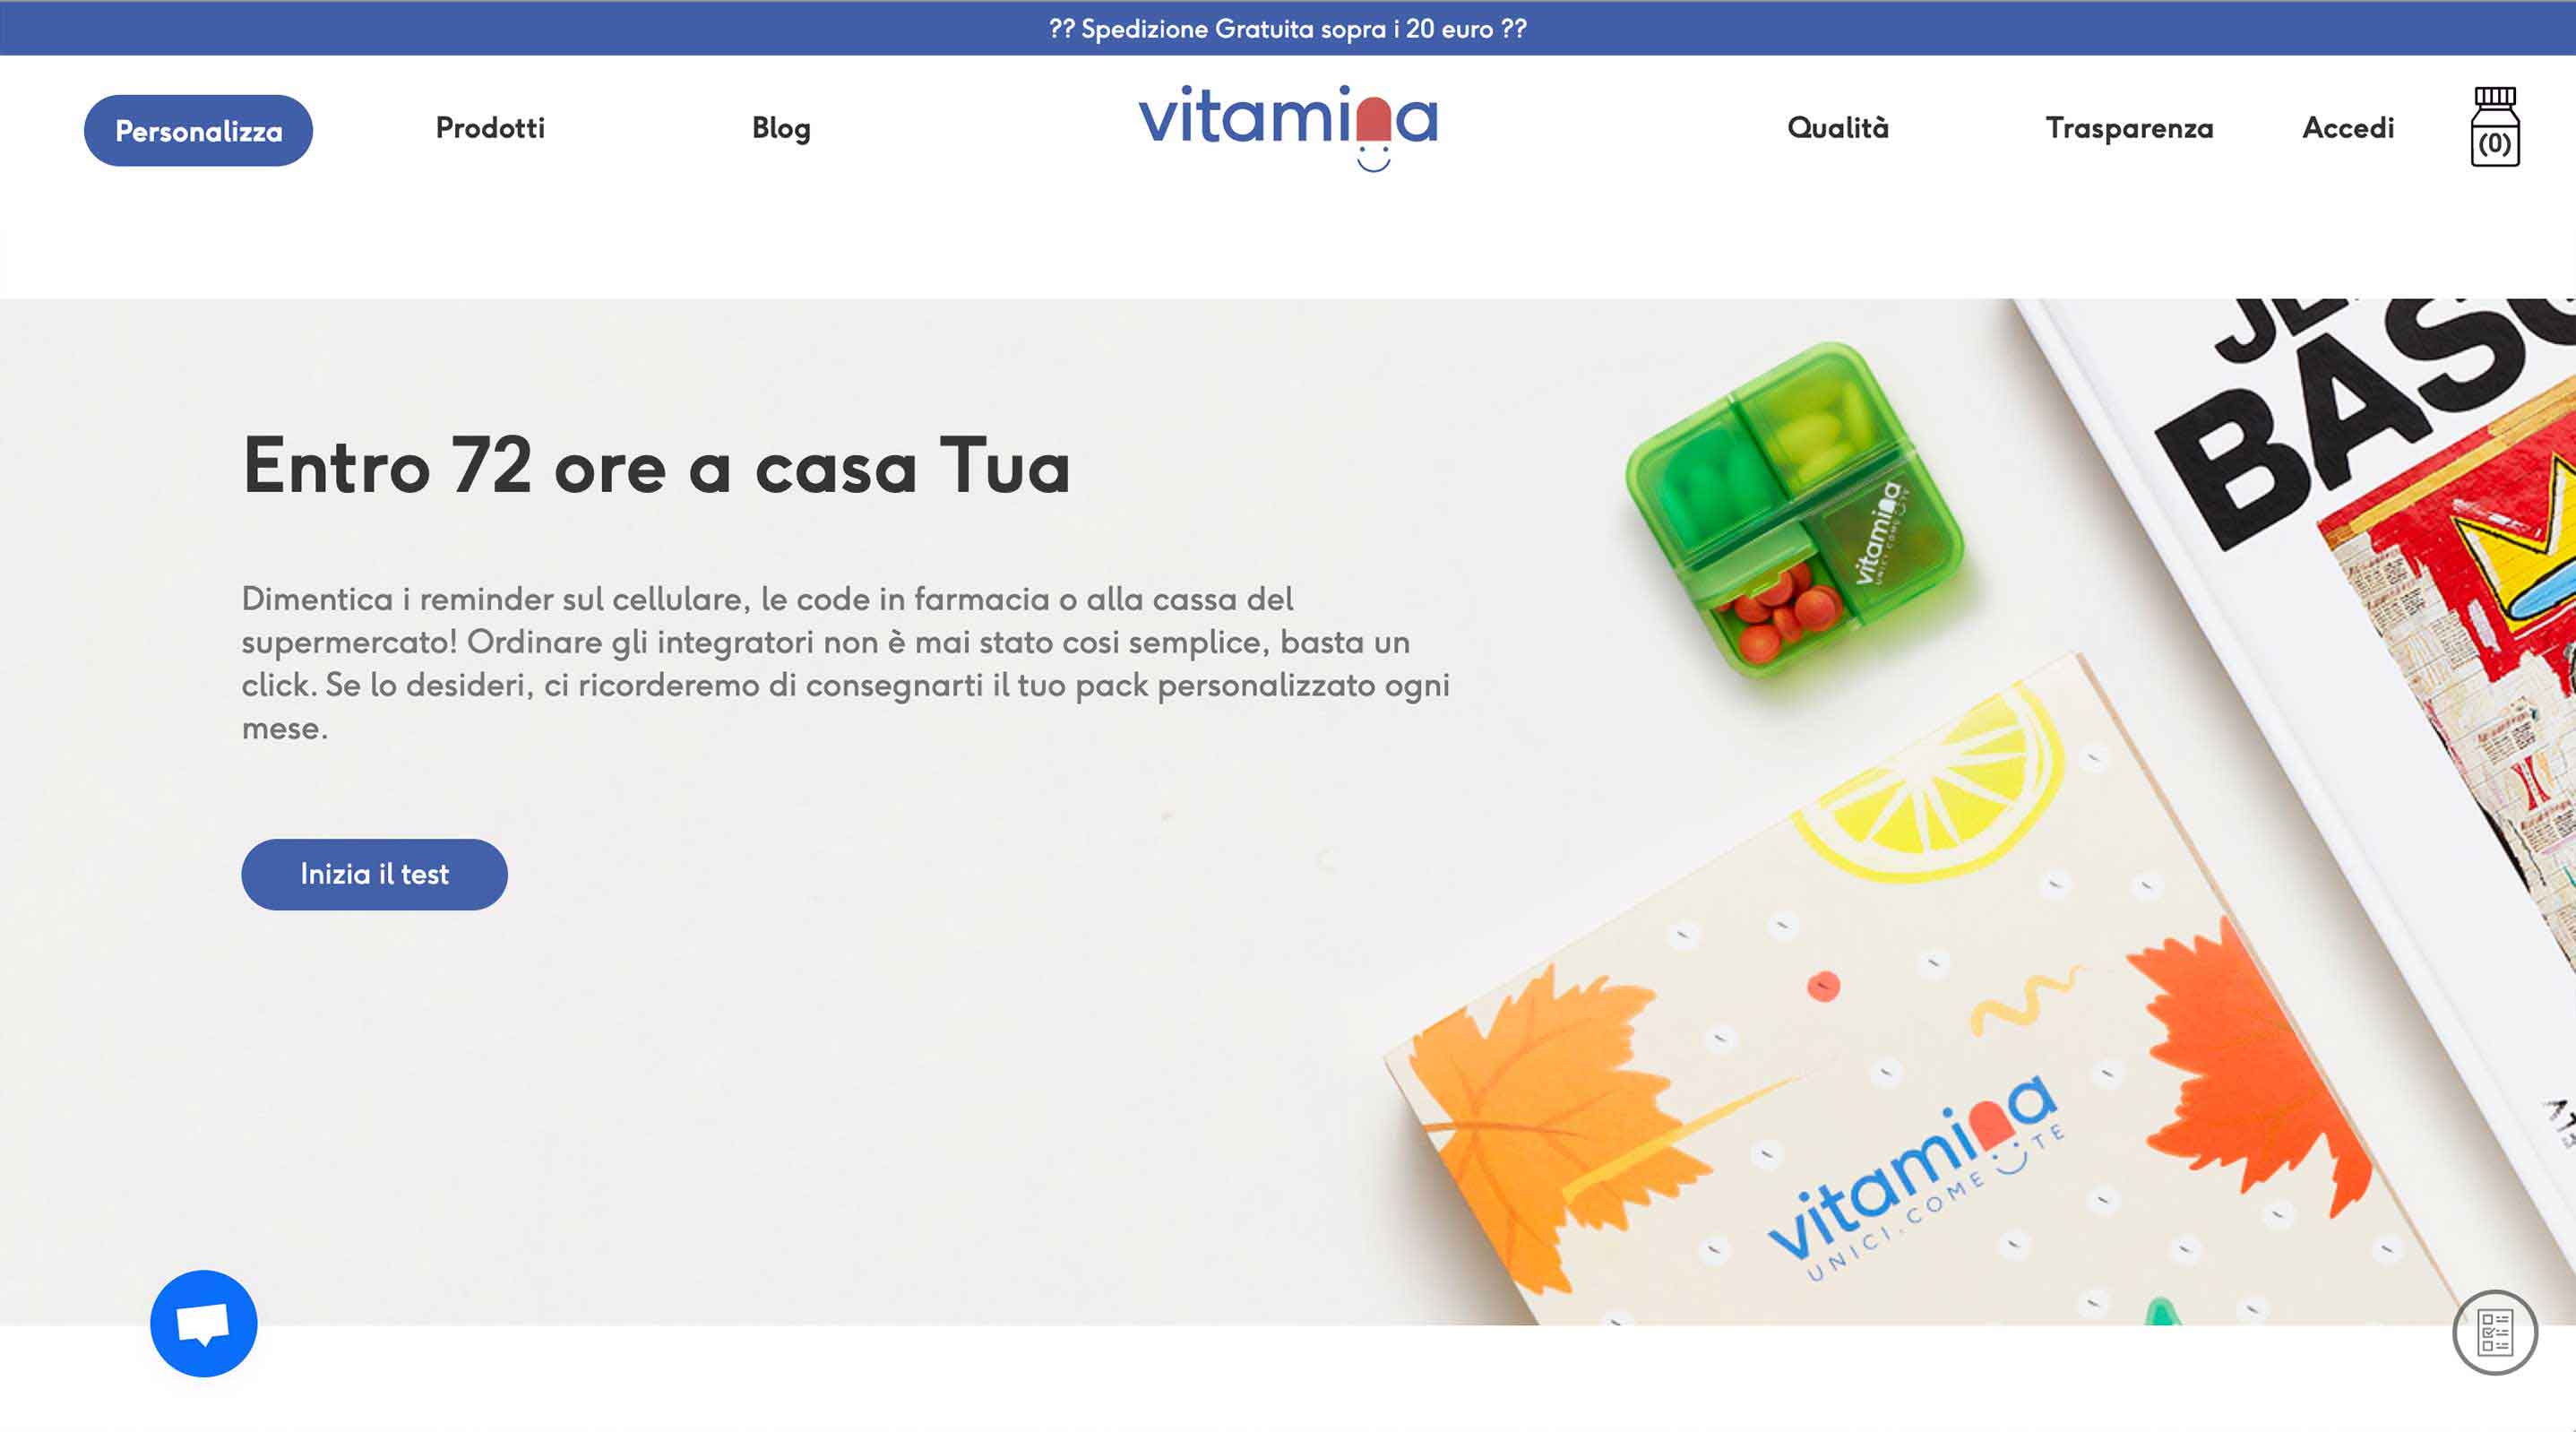 Vitamina is the first delivery service for Made in Italy personalized supplements.